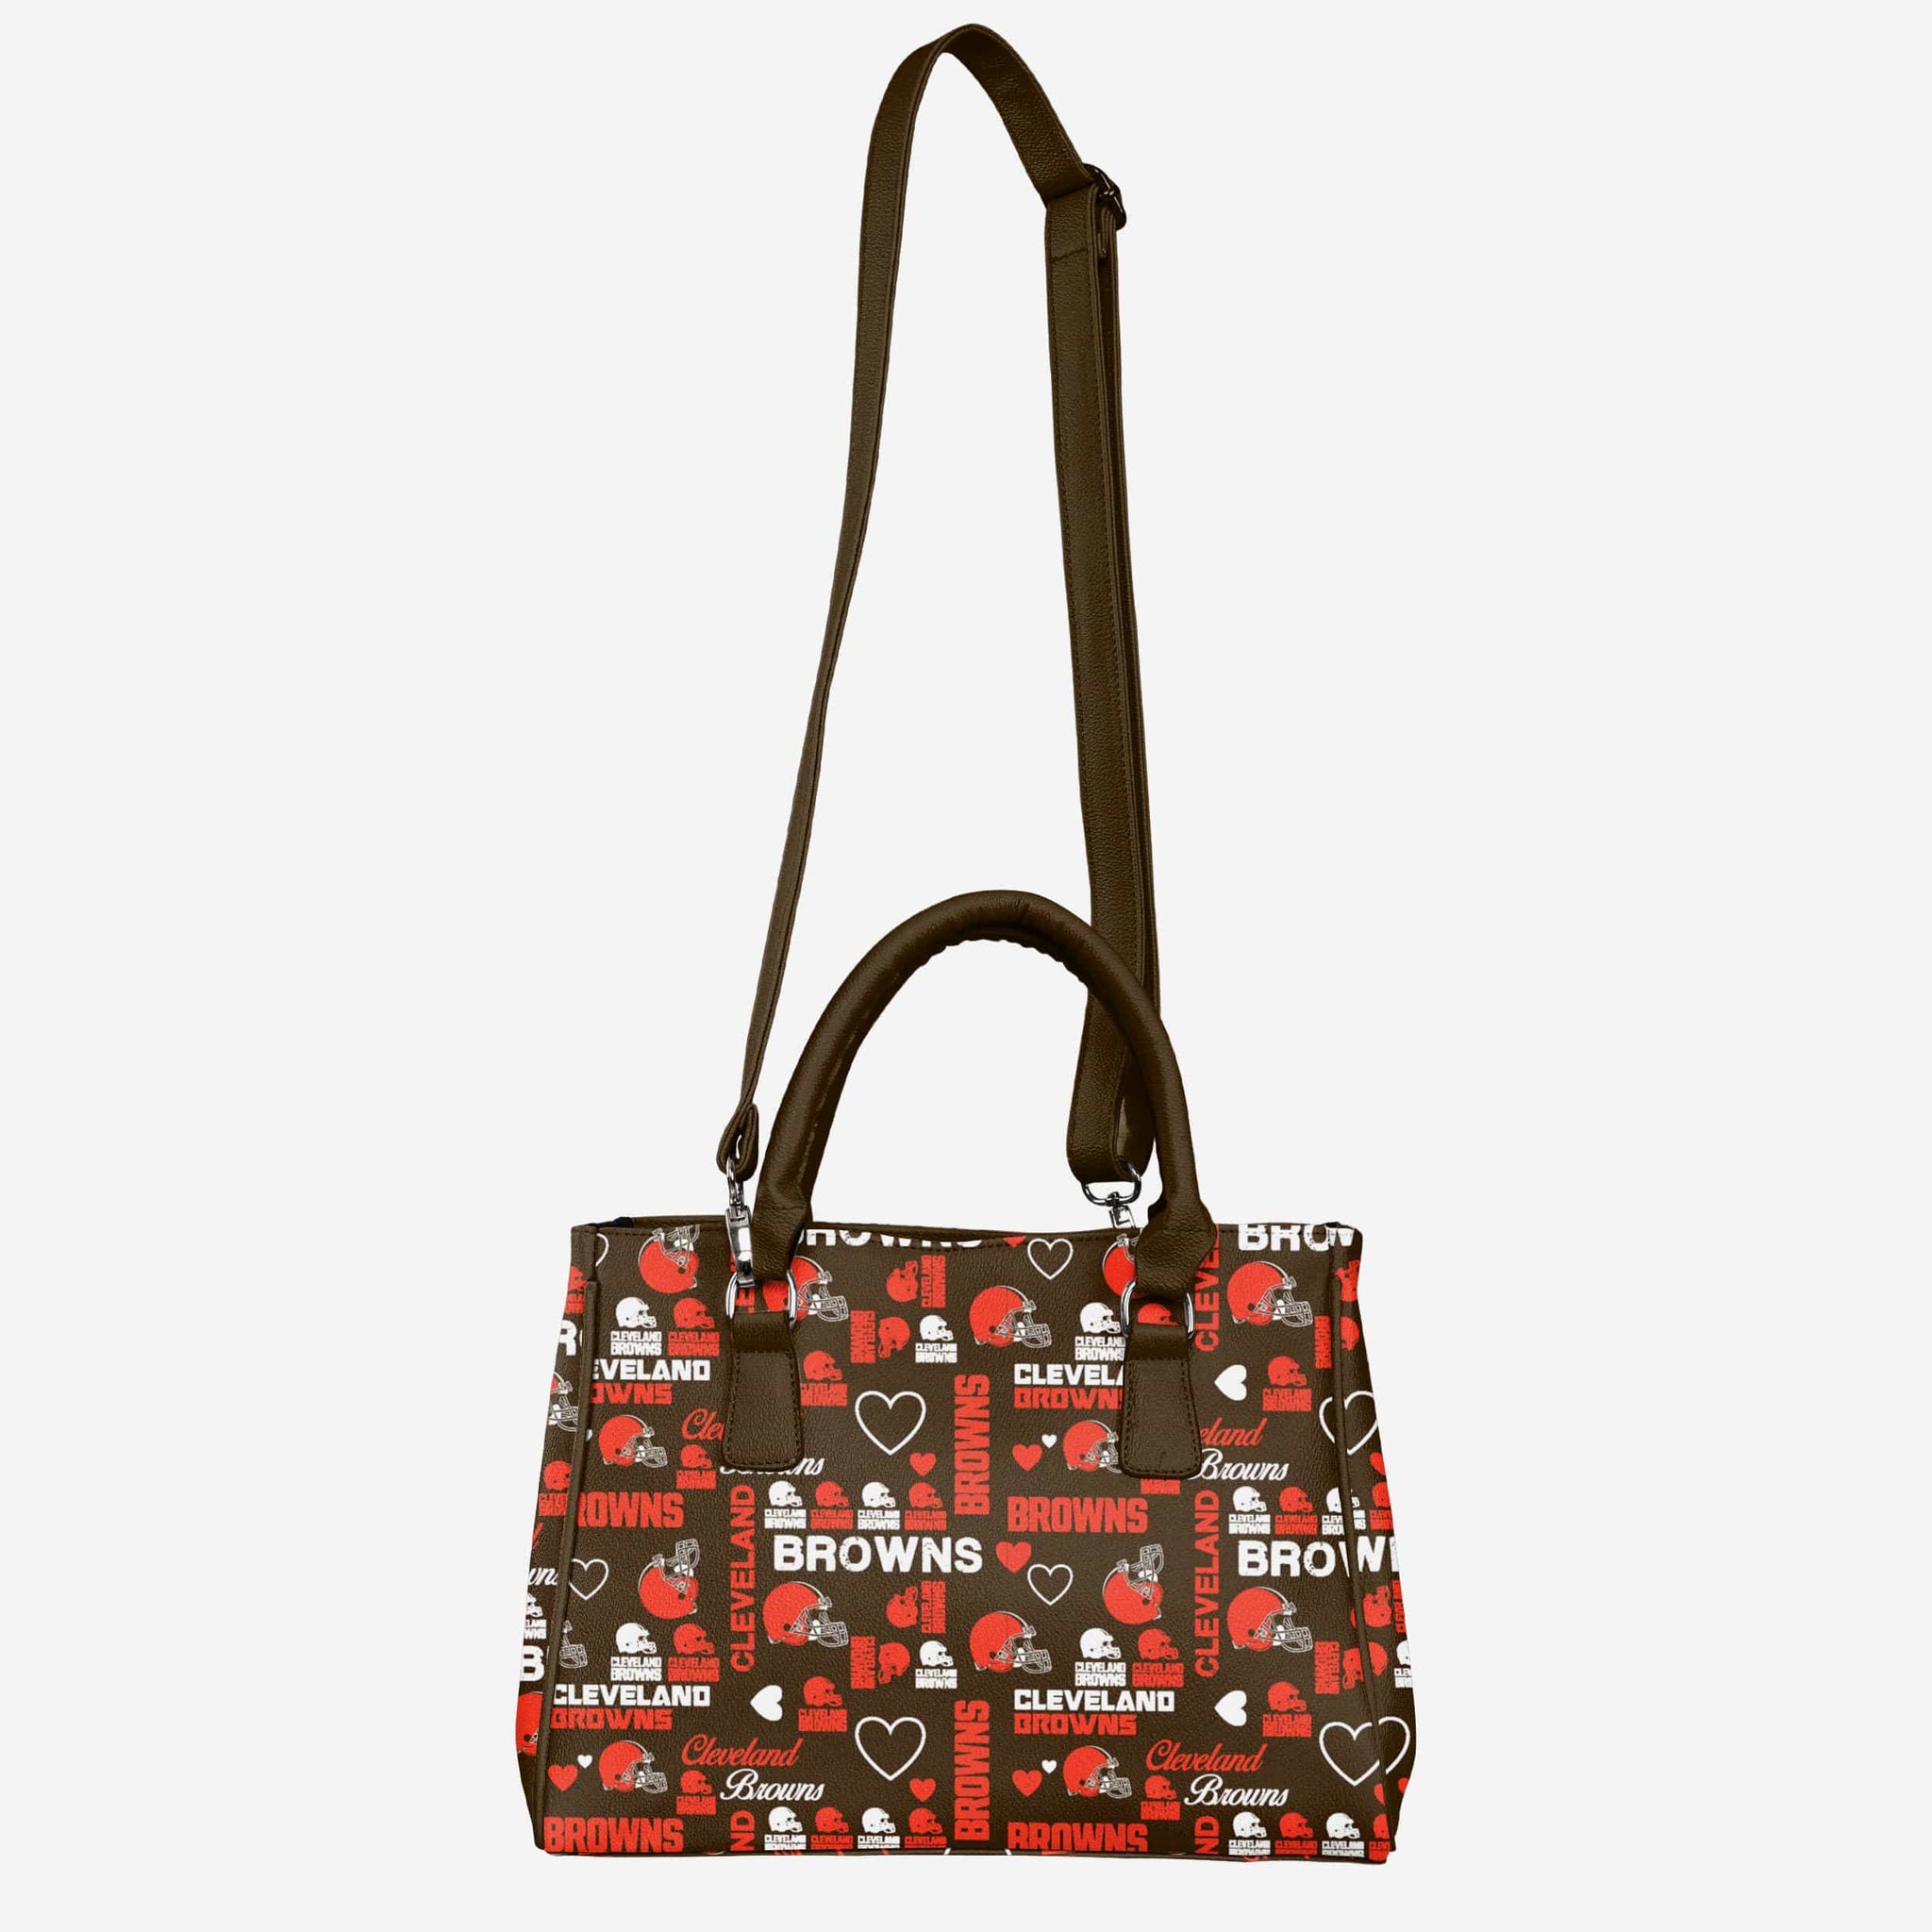 St. Louis Cardinals - This Just In: Additional styles of Dooney & Bourke  have arrived at the Official Cardinals Team Store just in time for  Christmas!